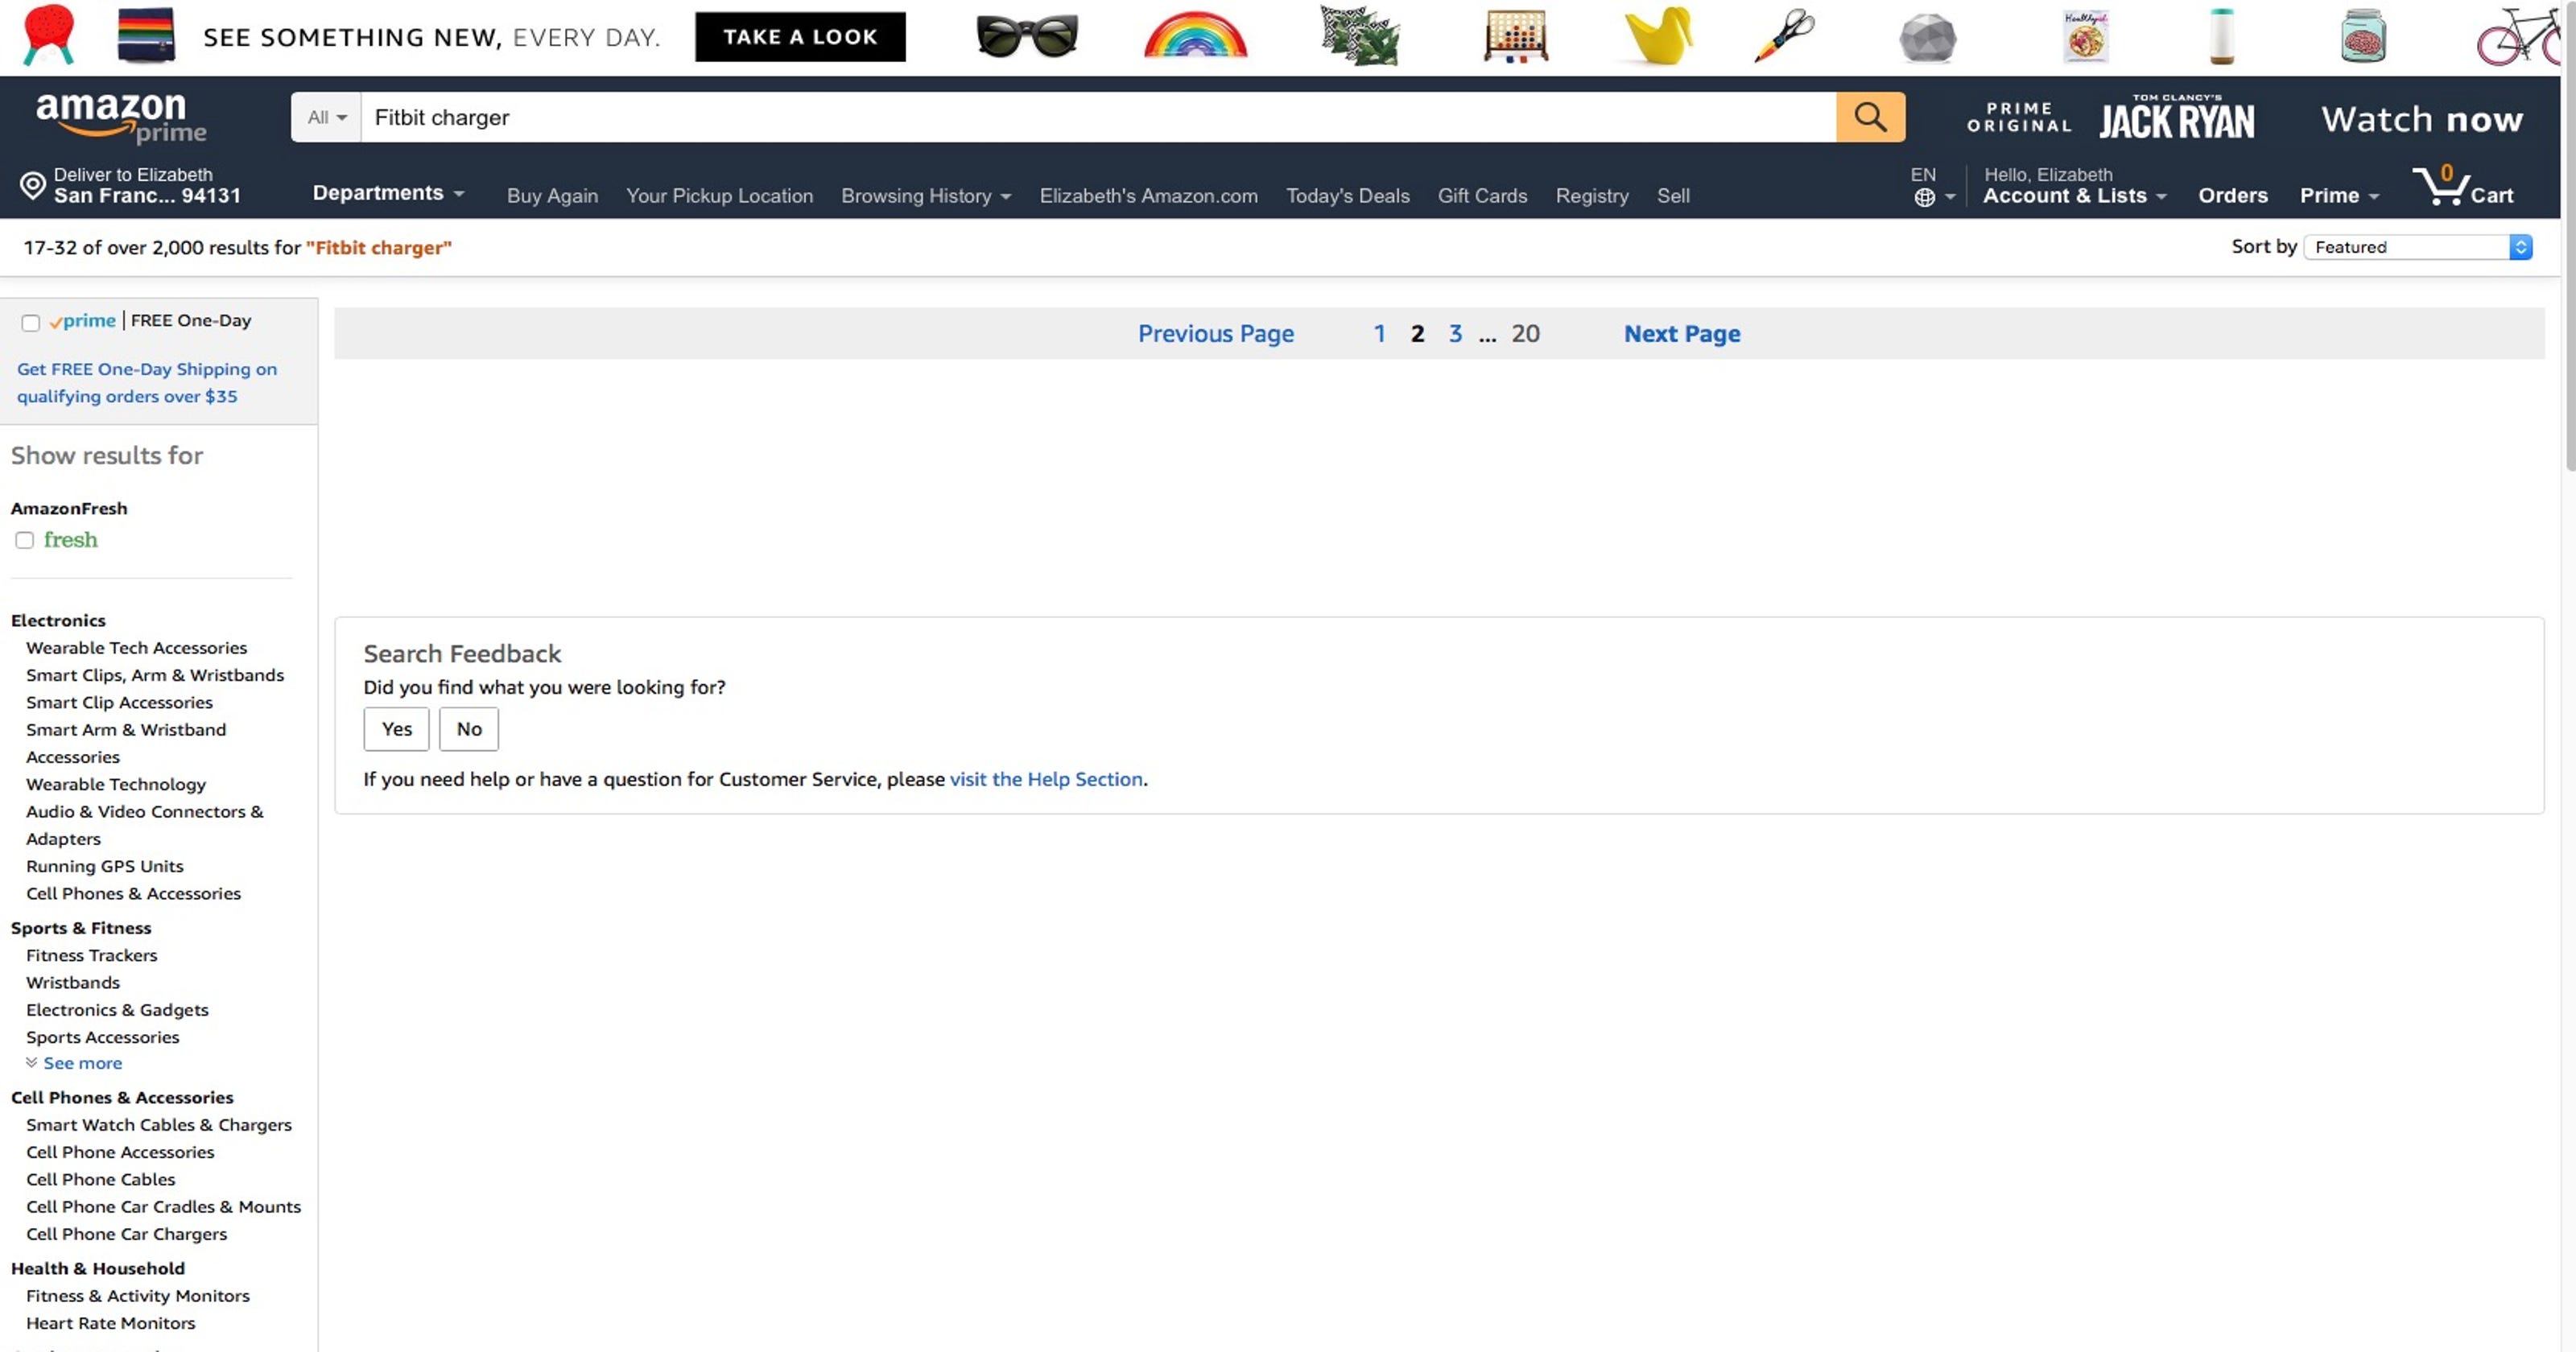 Amazon.com users reported problems searching the website Wednesday